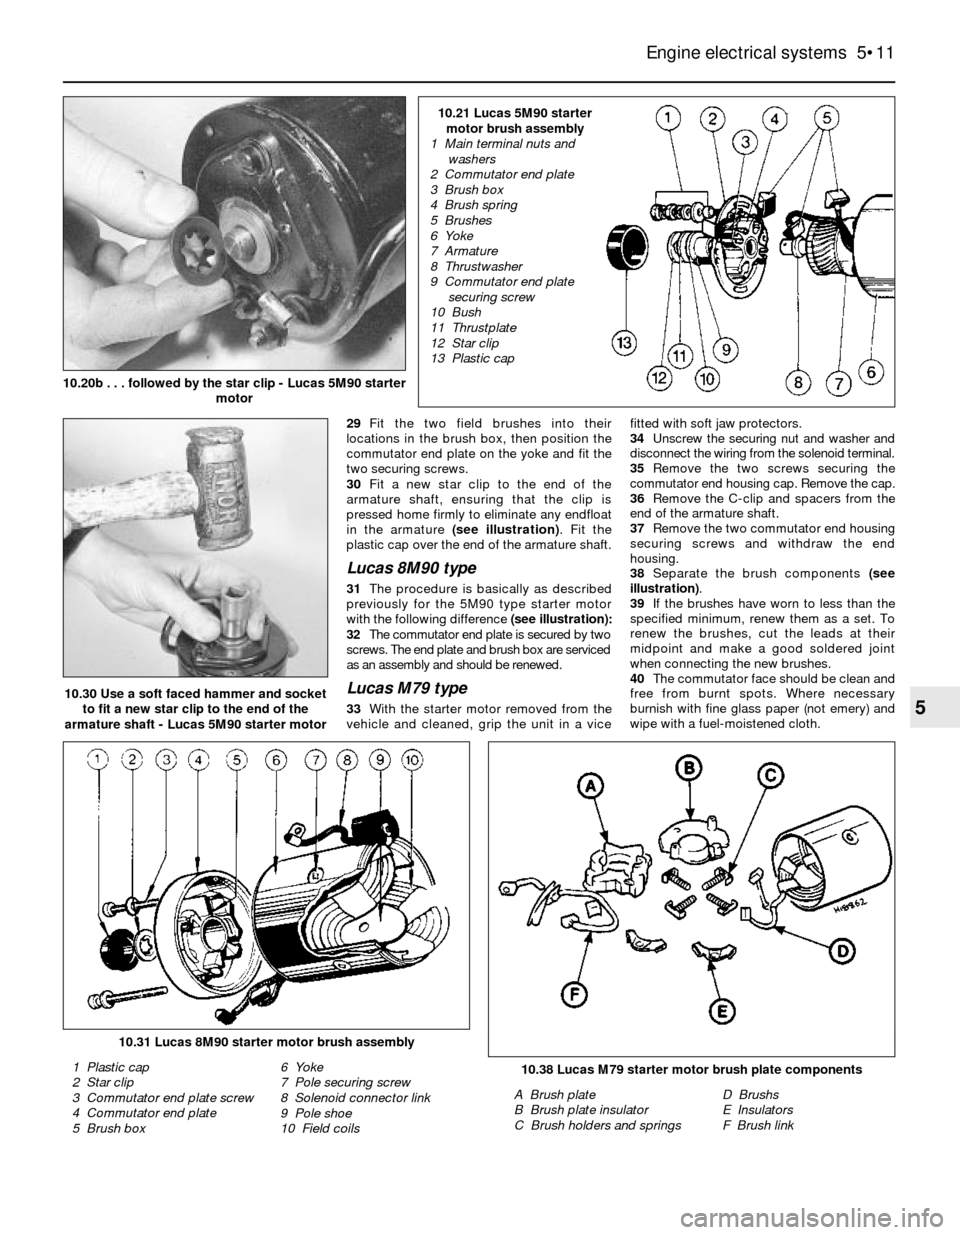 FORD SIERRA 1993 2.G Engine Electrical Systems User Guide 29Fit the two field brushes into their
locations in the brush box, then position the
commutator end plate on the yoke and fit the
two securing screws.
30Fit a new star clip to the end of the
armature 